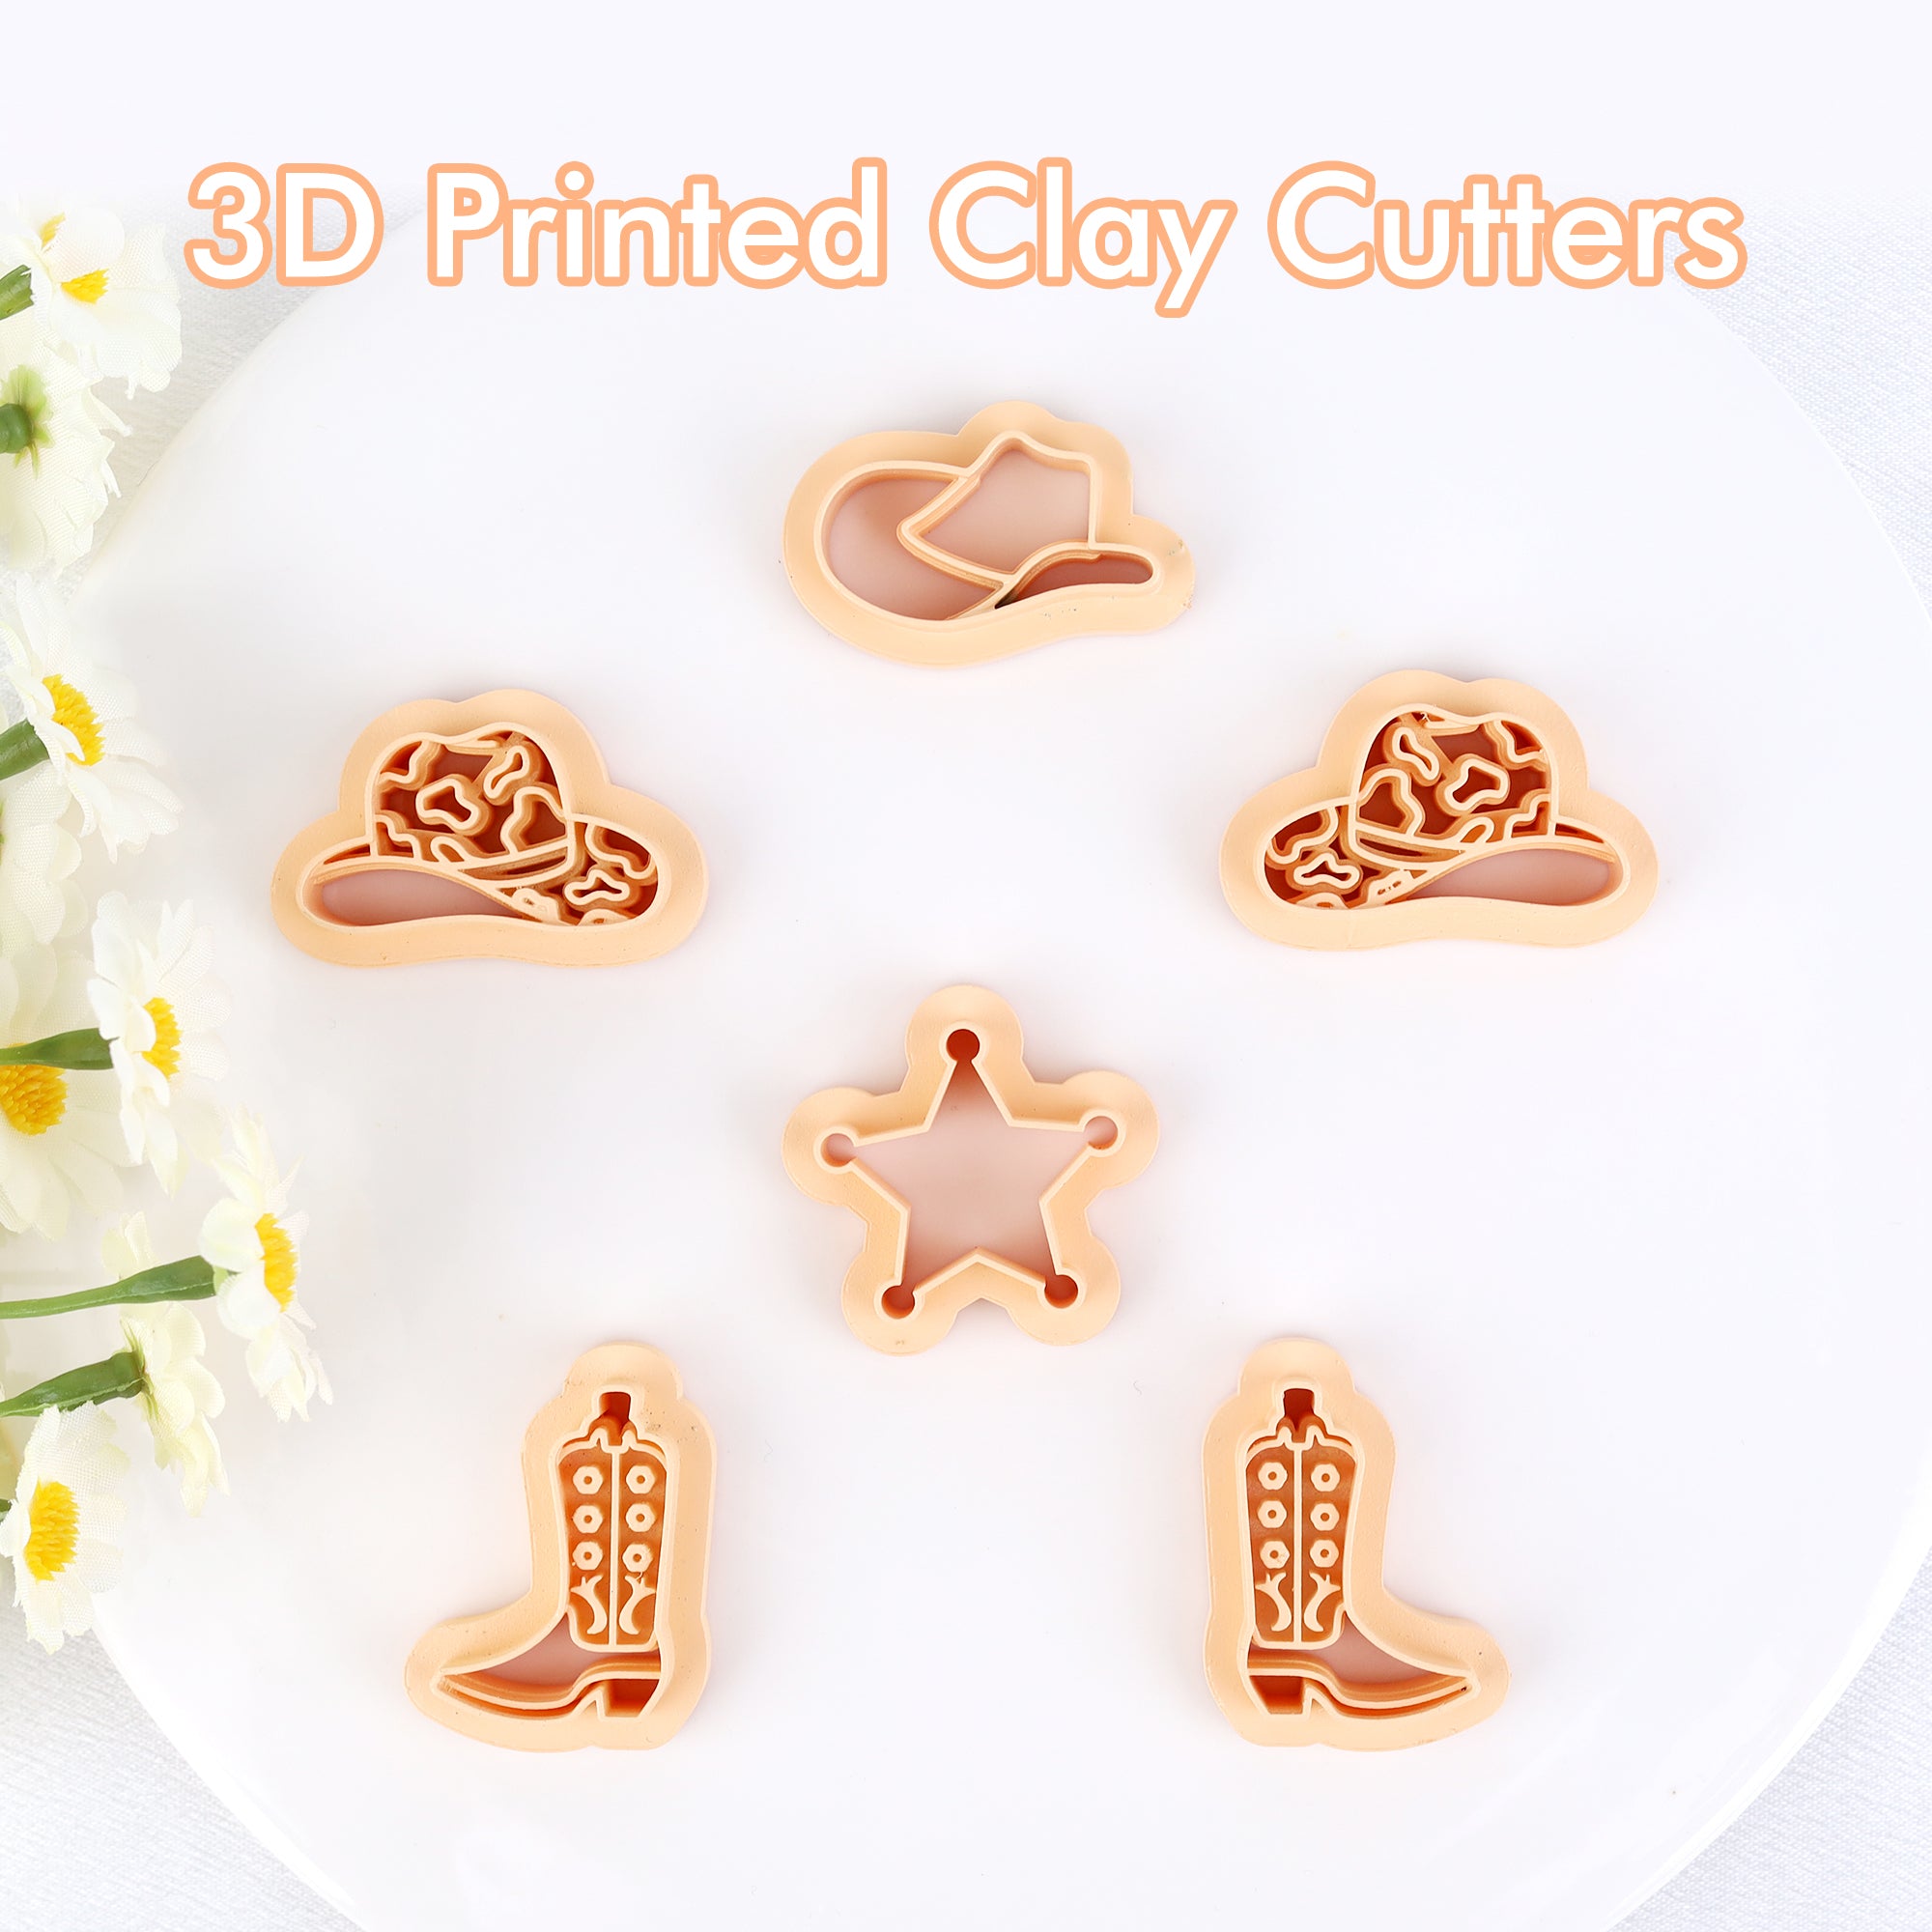 Puocaon Cowboy Polymer Clay Cutters 6 Pcs